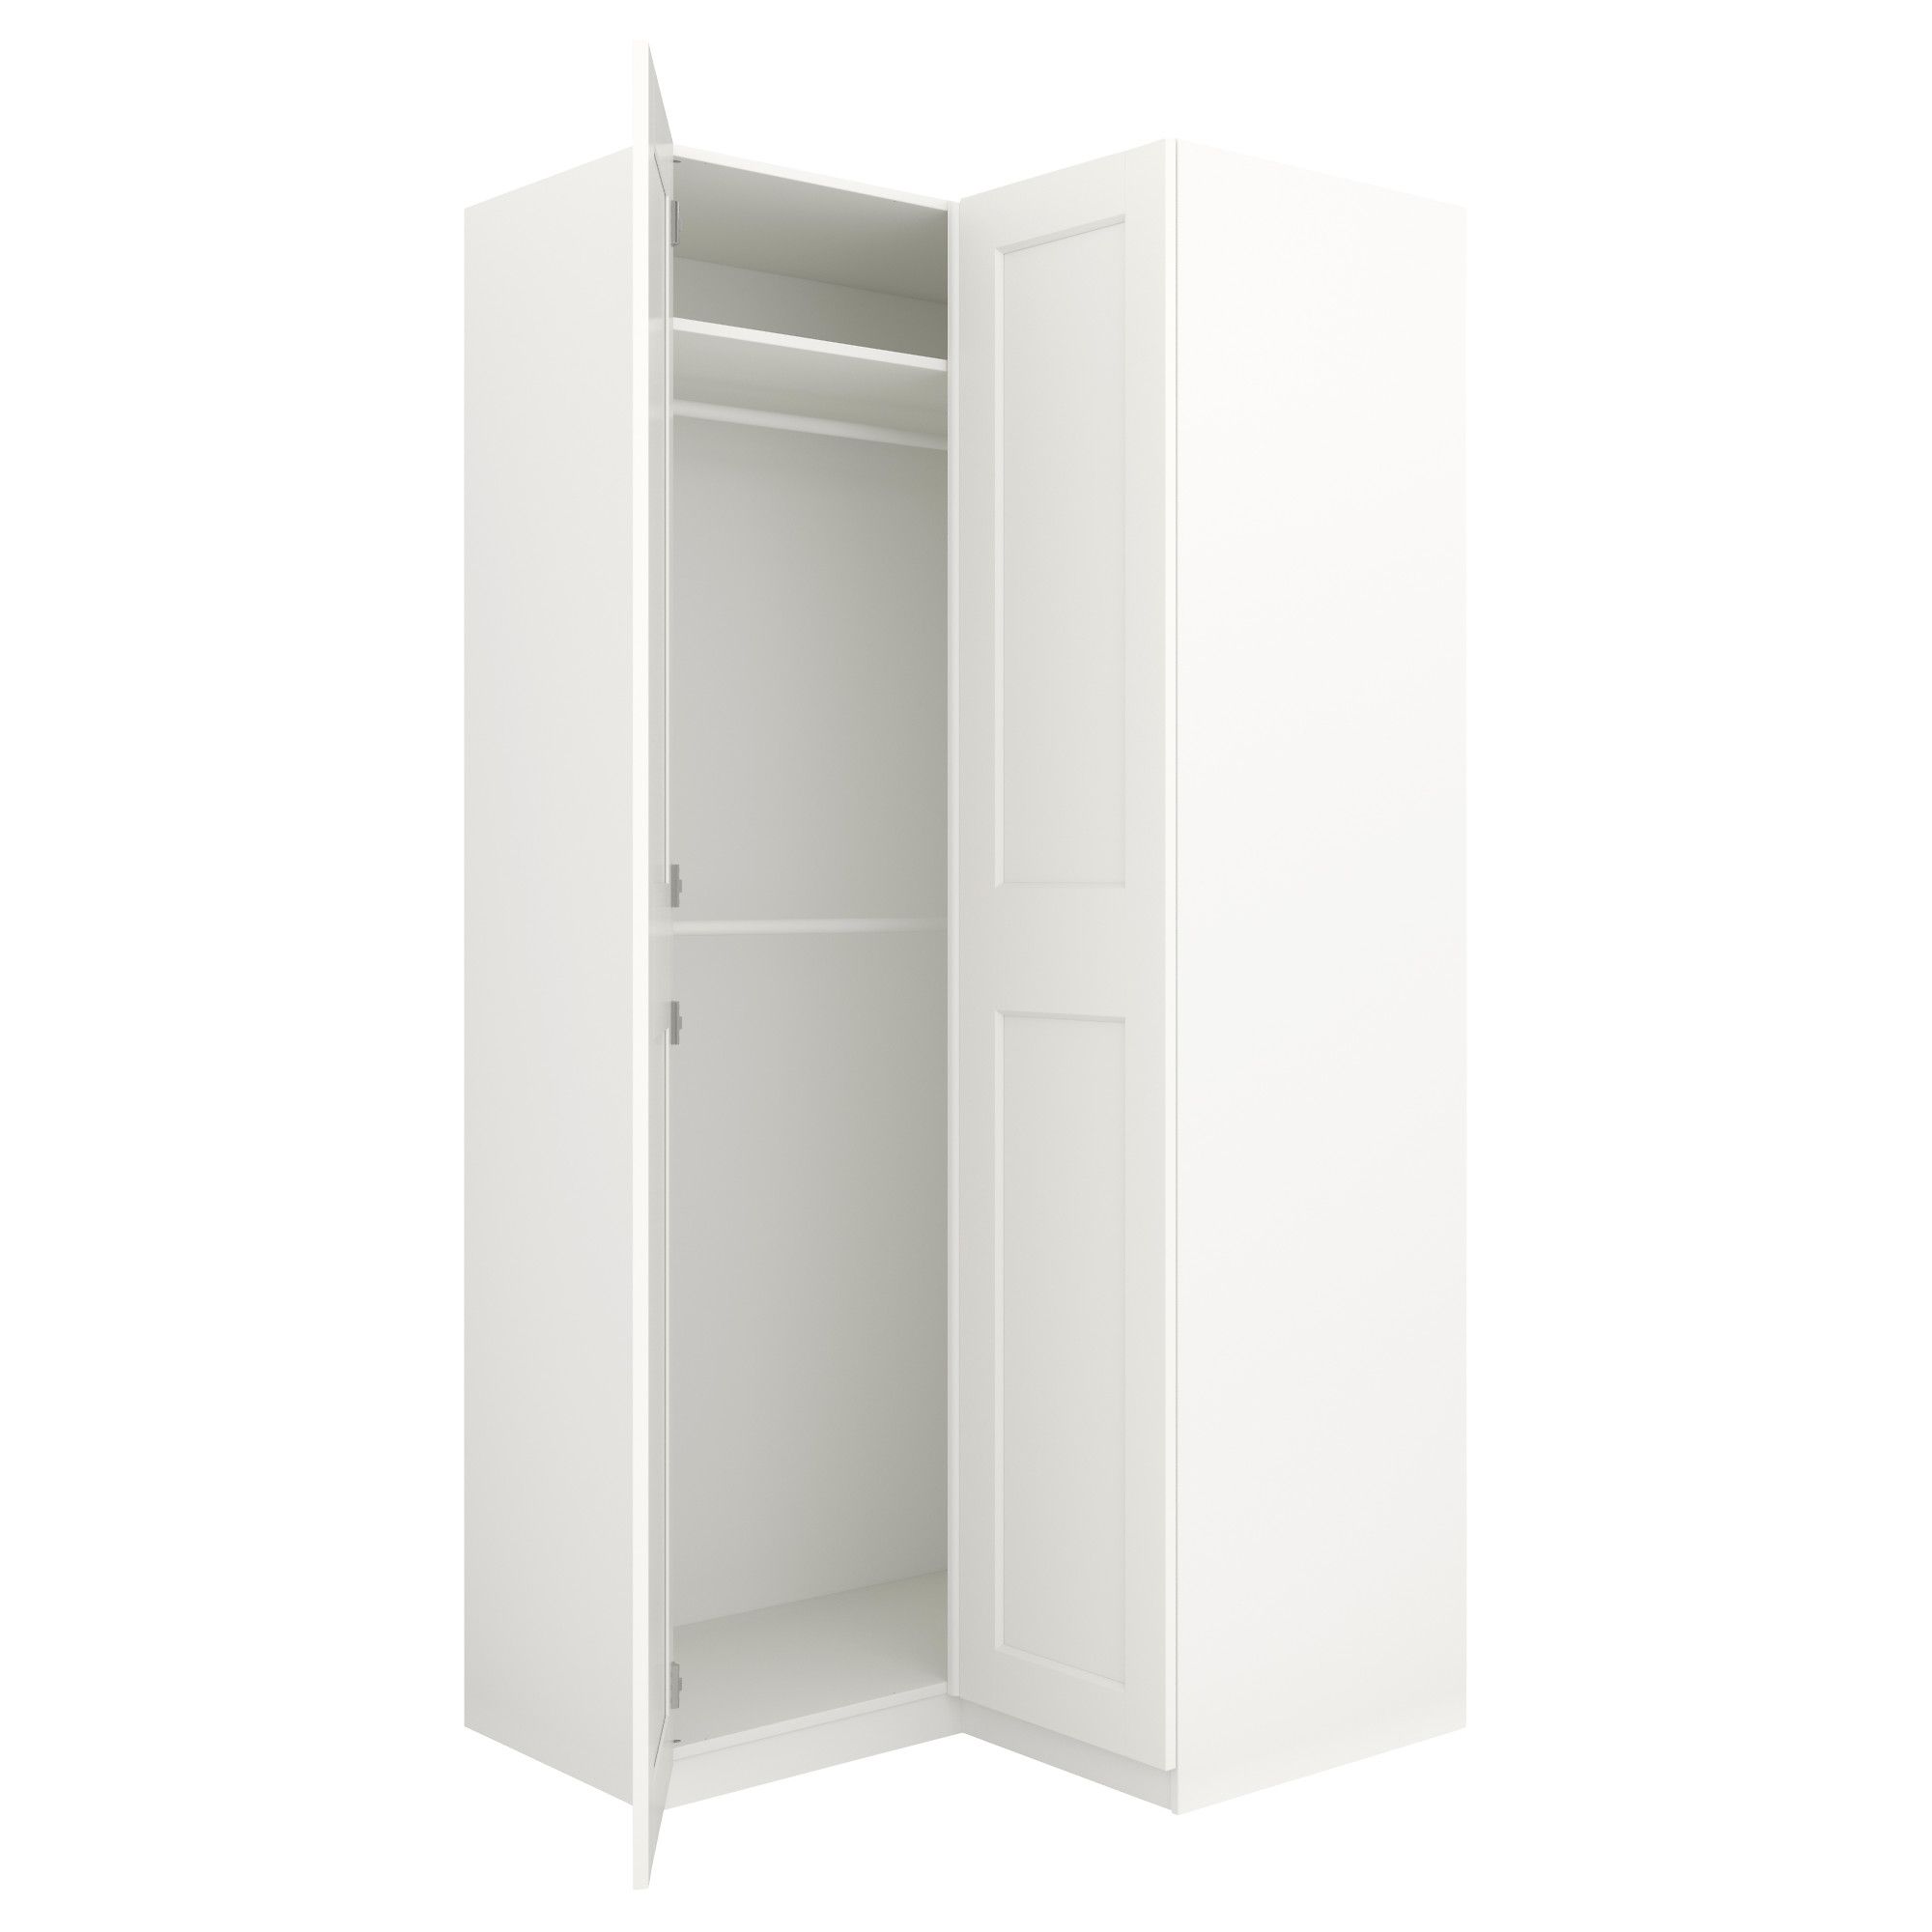 Most Recently Released Pax Corner Wardrobe – Ikea Within Small Corner Wardrobes (View 1 of 15)